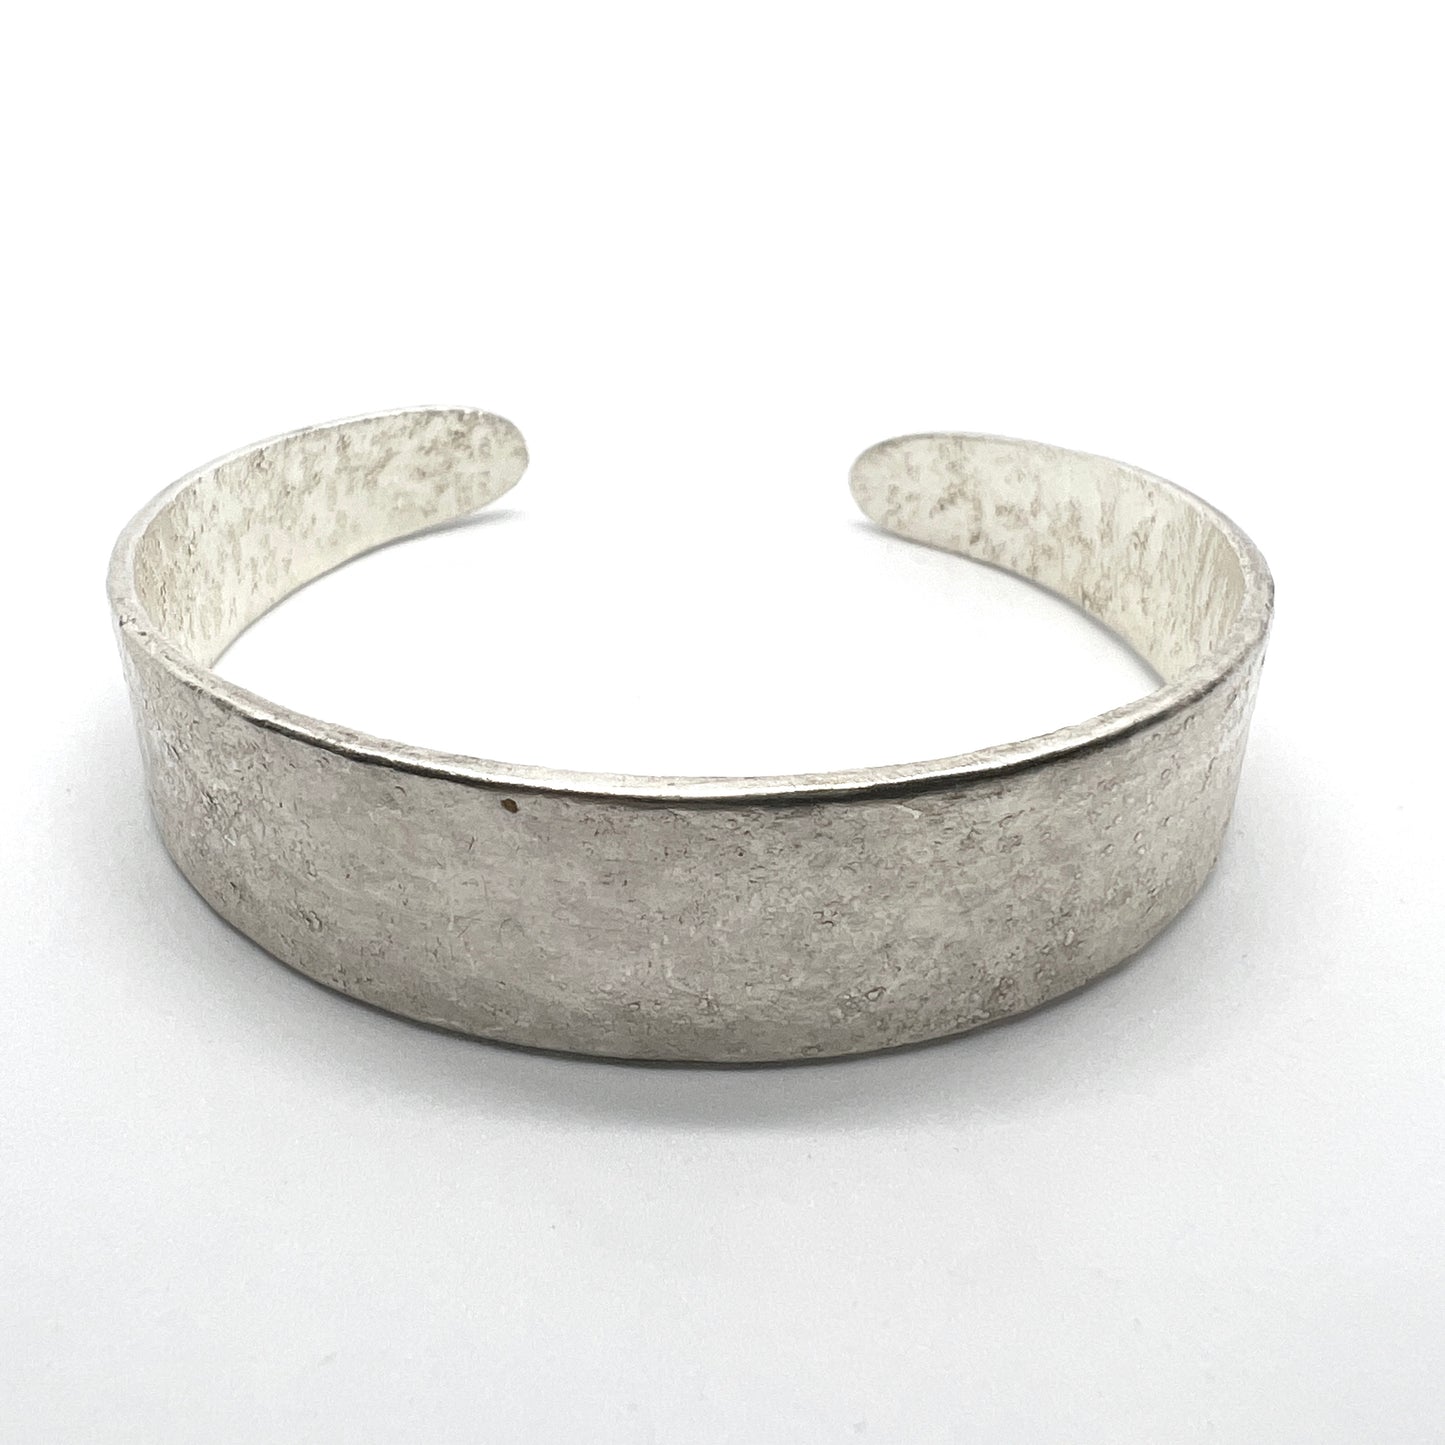 TOUS, Pre-owned Sterling Silver Cuff Bracelet.